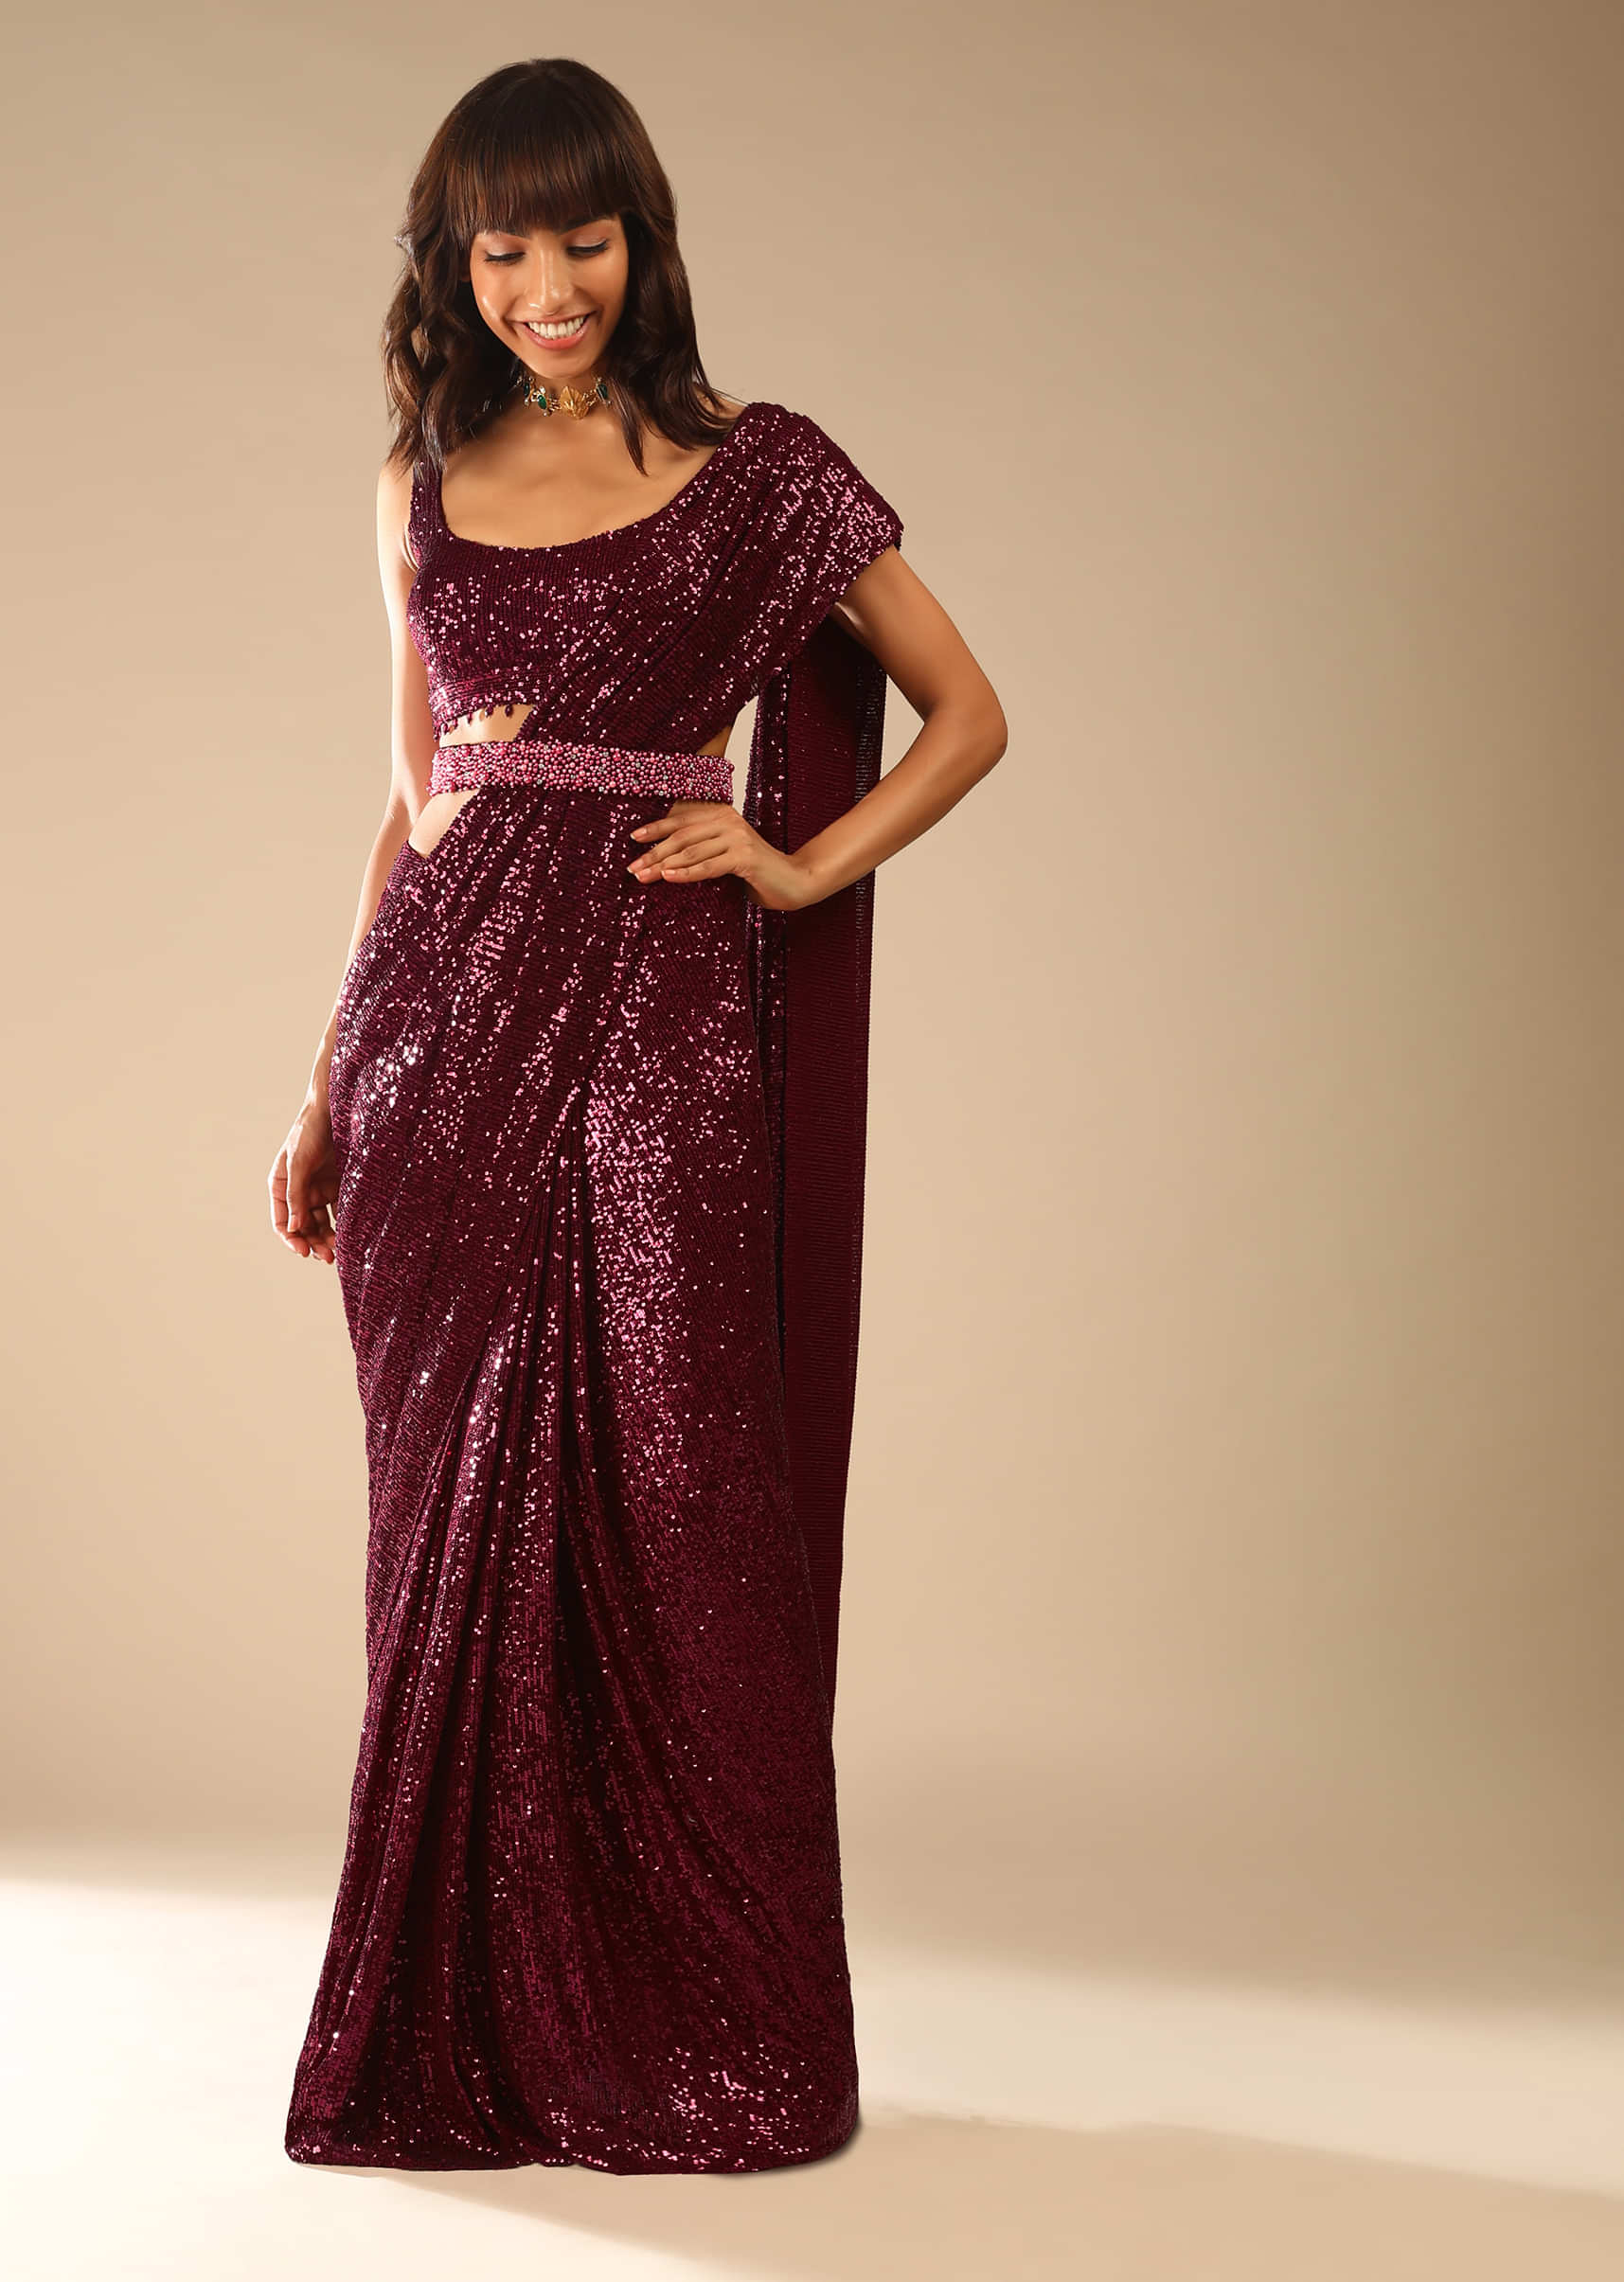 Burgundy Ready Pleated Saree Embellished In Sequins With Bead Fringes, Moti Embellished Belt And Matching Sequins Blouse